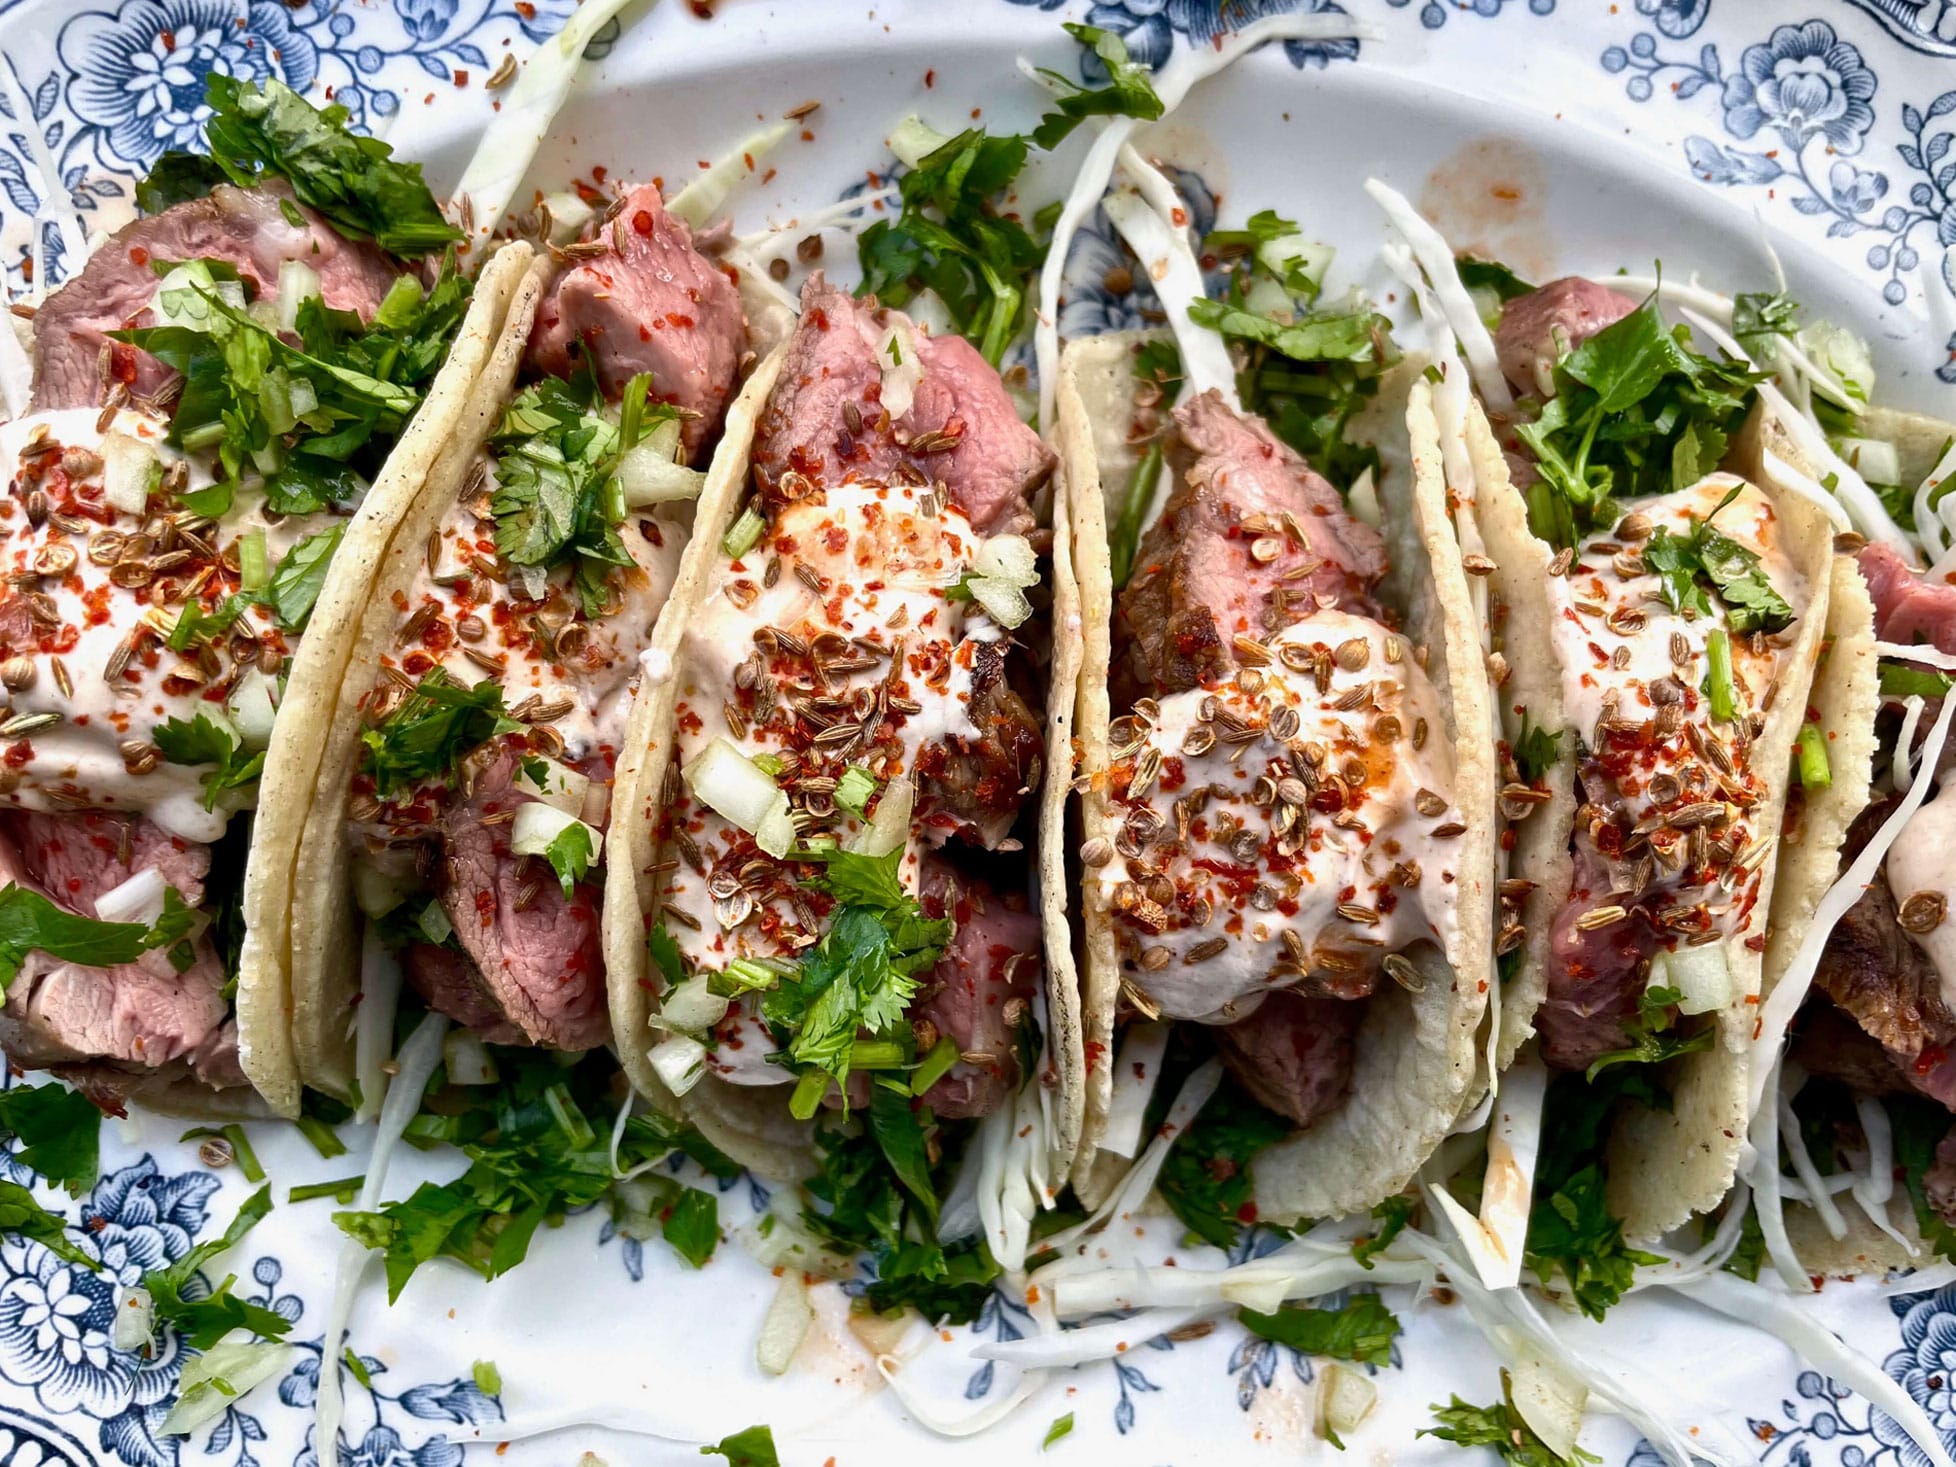 Spiced Lamb Fillet Tacos with Chipotle Sour Cream